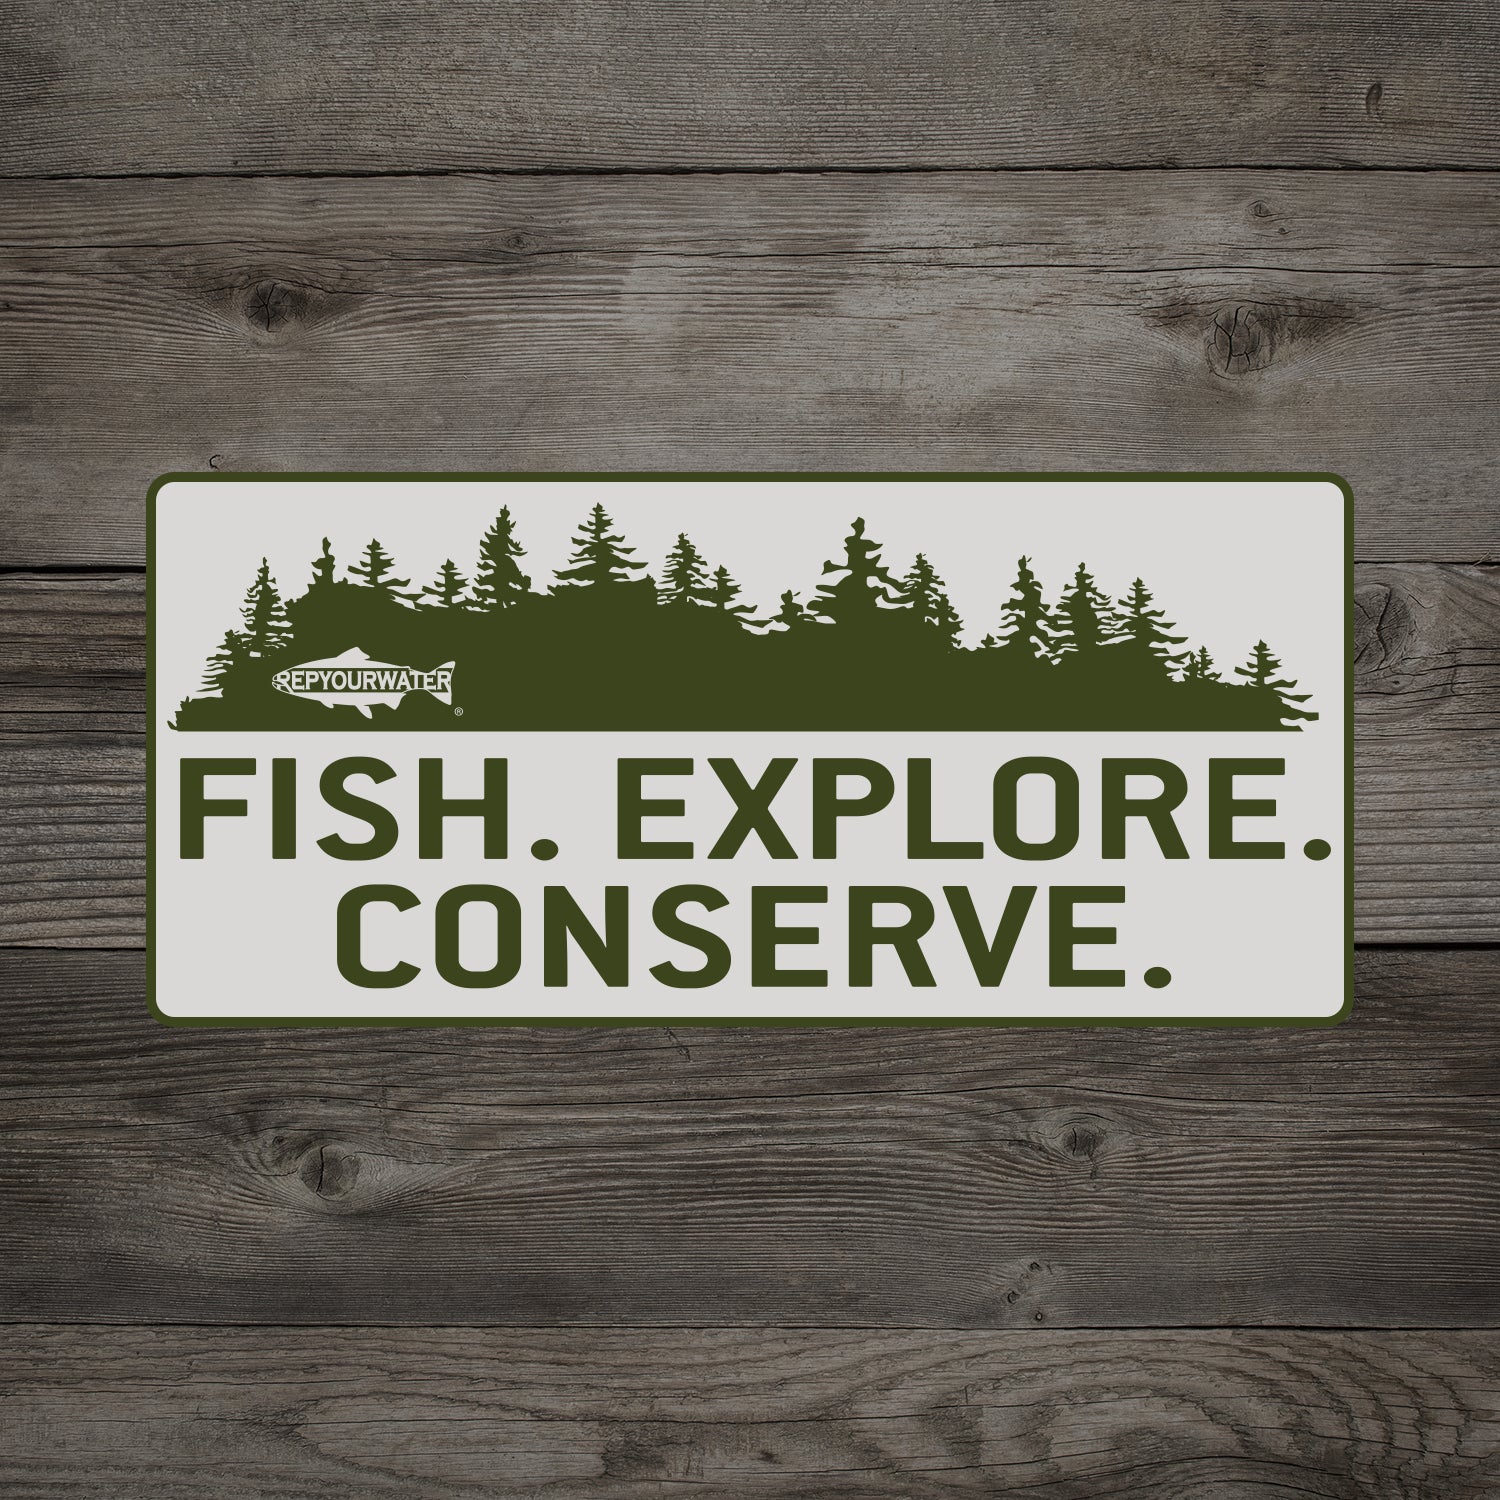 A wooden background has a mockup of a sticker on it which has pine trees above the words fish explore conserve. In the pine trees is a logo that reads repyourwater inside a trout silhouette